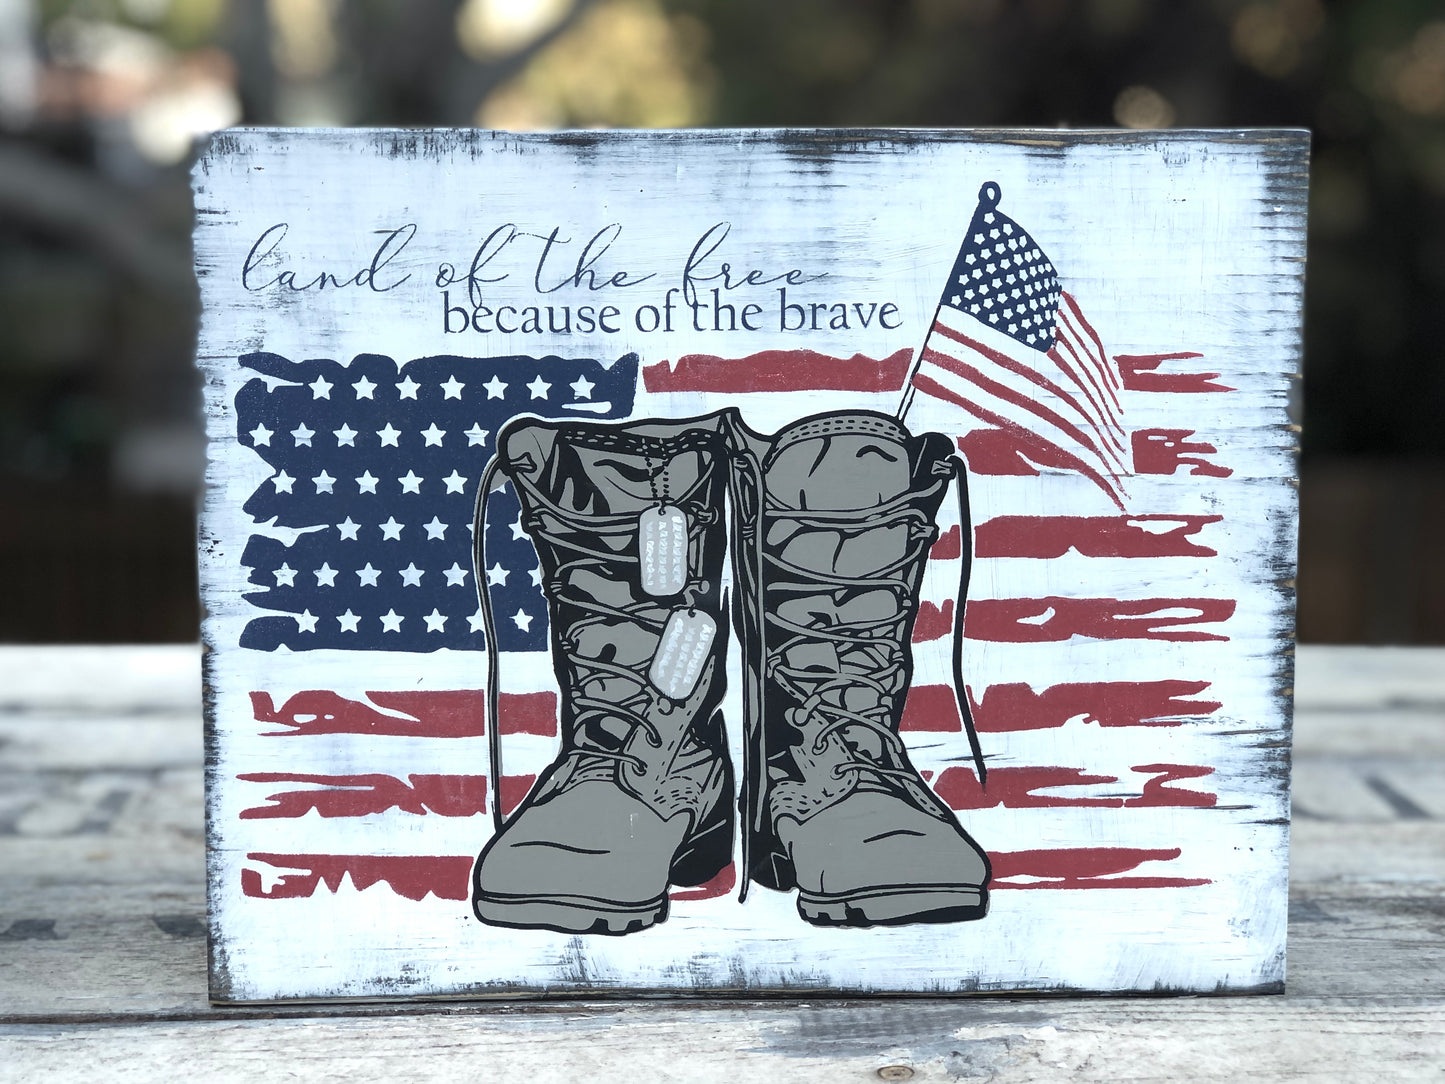 LAND OF THE FREE BECAUSE OF THE BRAVE- WOOD SIGN